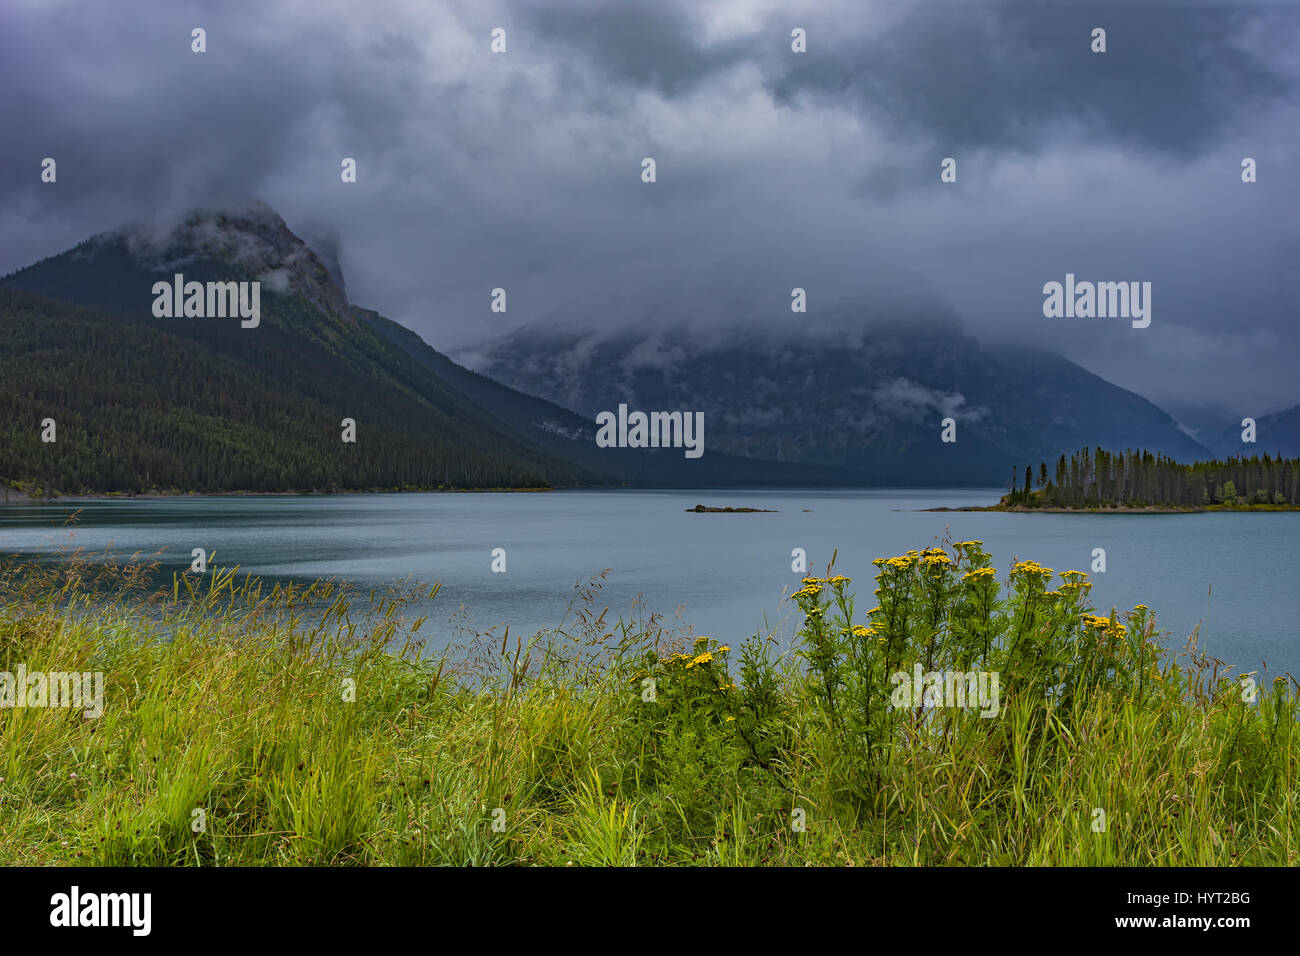 Upper Kananaskis Lake on a stormy day in the Rocky Mountanis near Canmore Alberta Canada Stock Photo